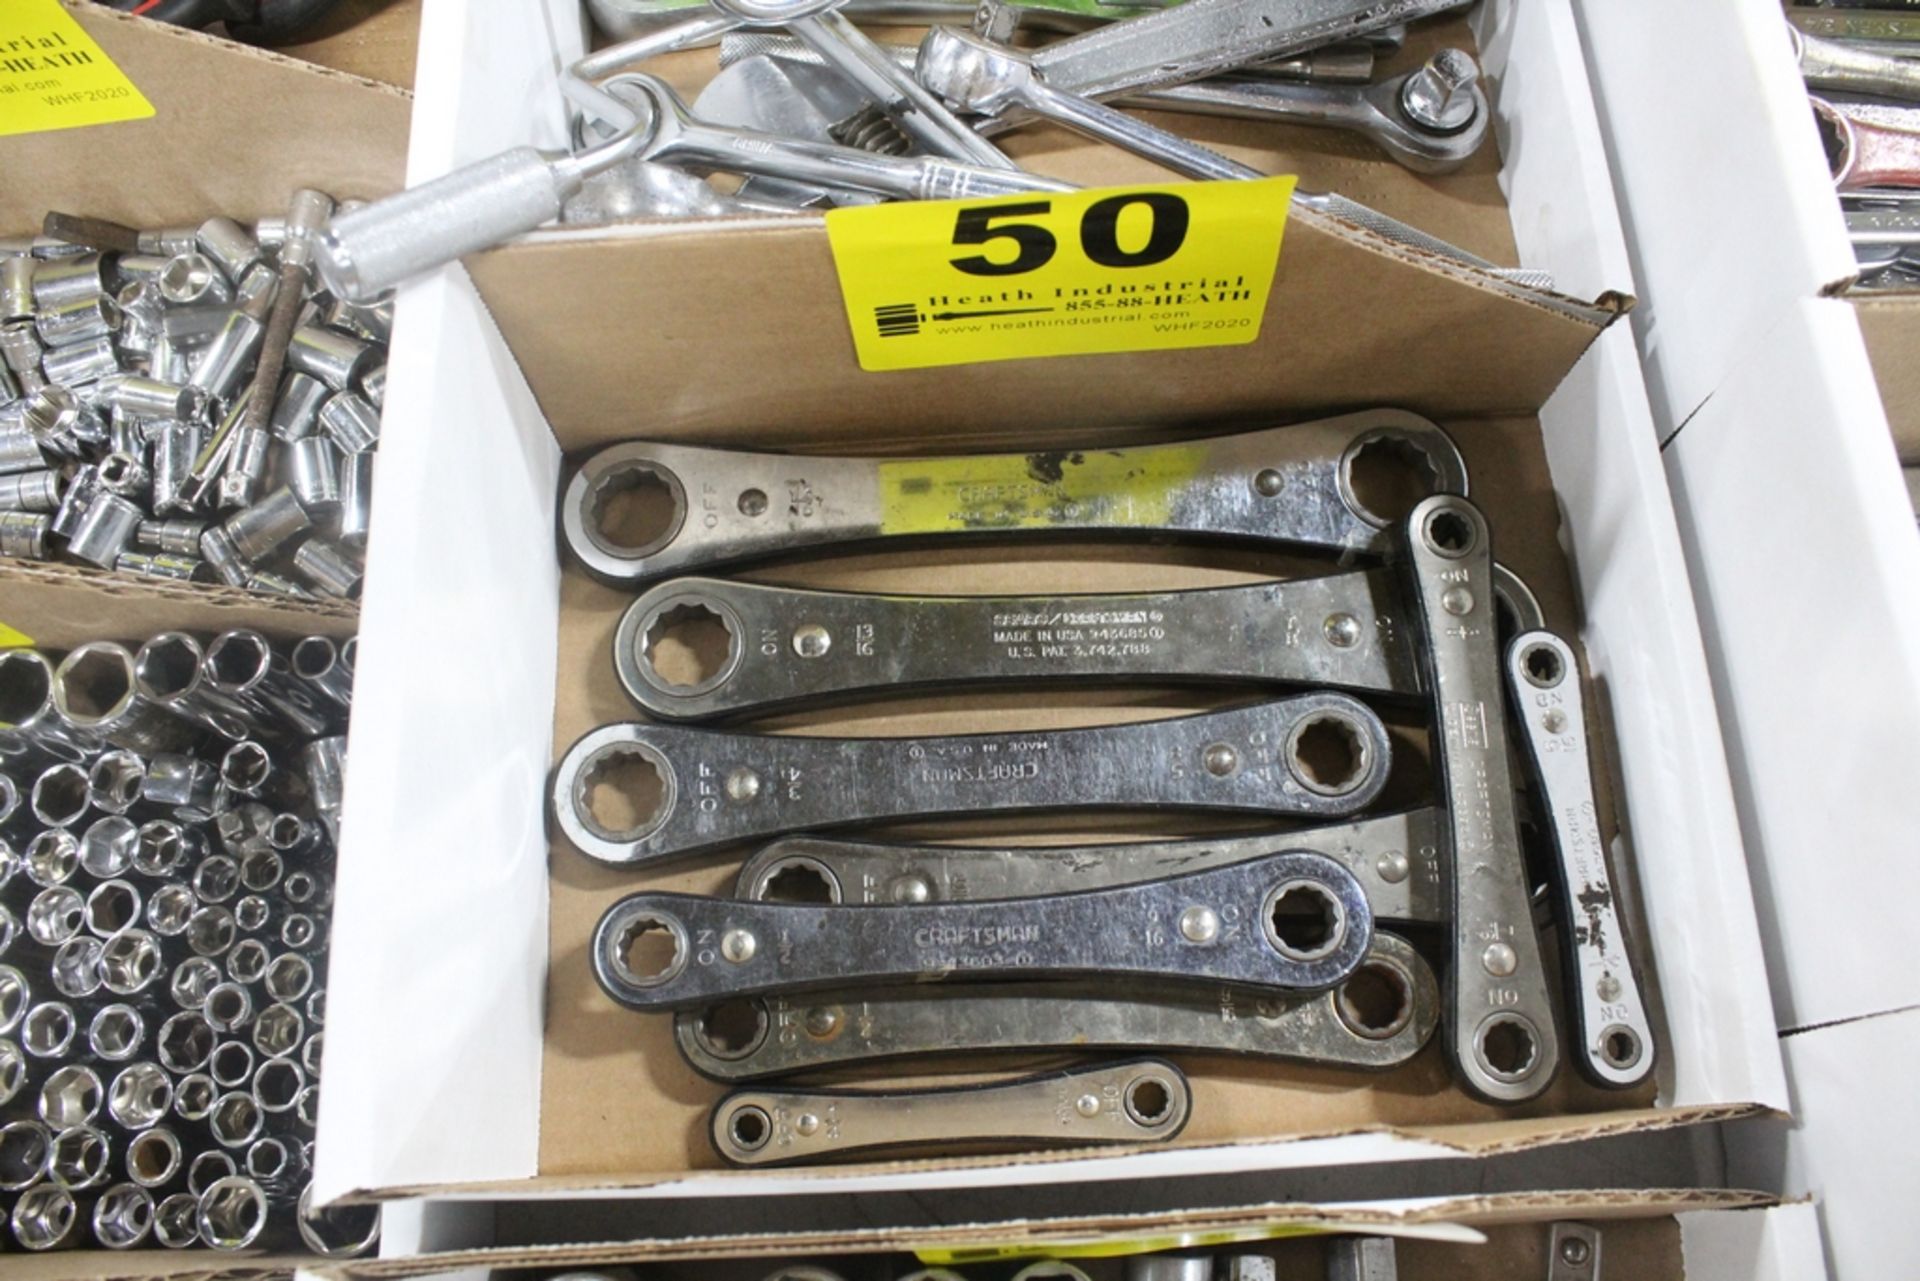 ASSORTED CRAFTSMAN RATCHET WRENCHES IN BOX